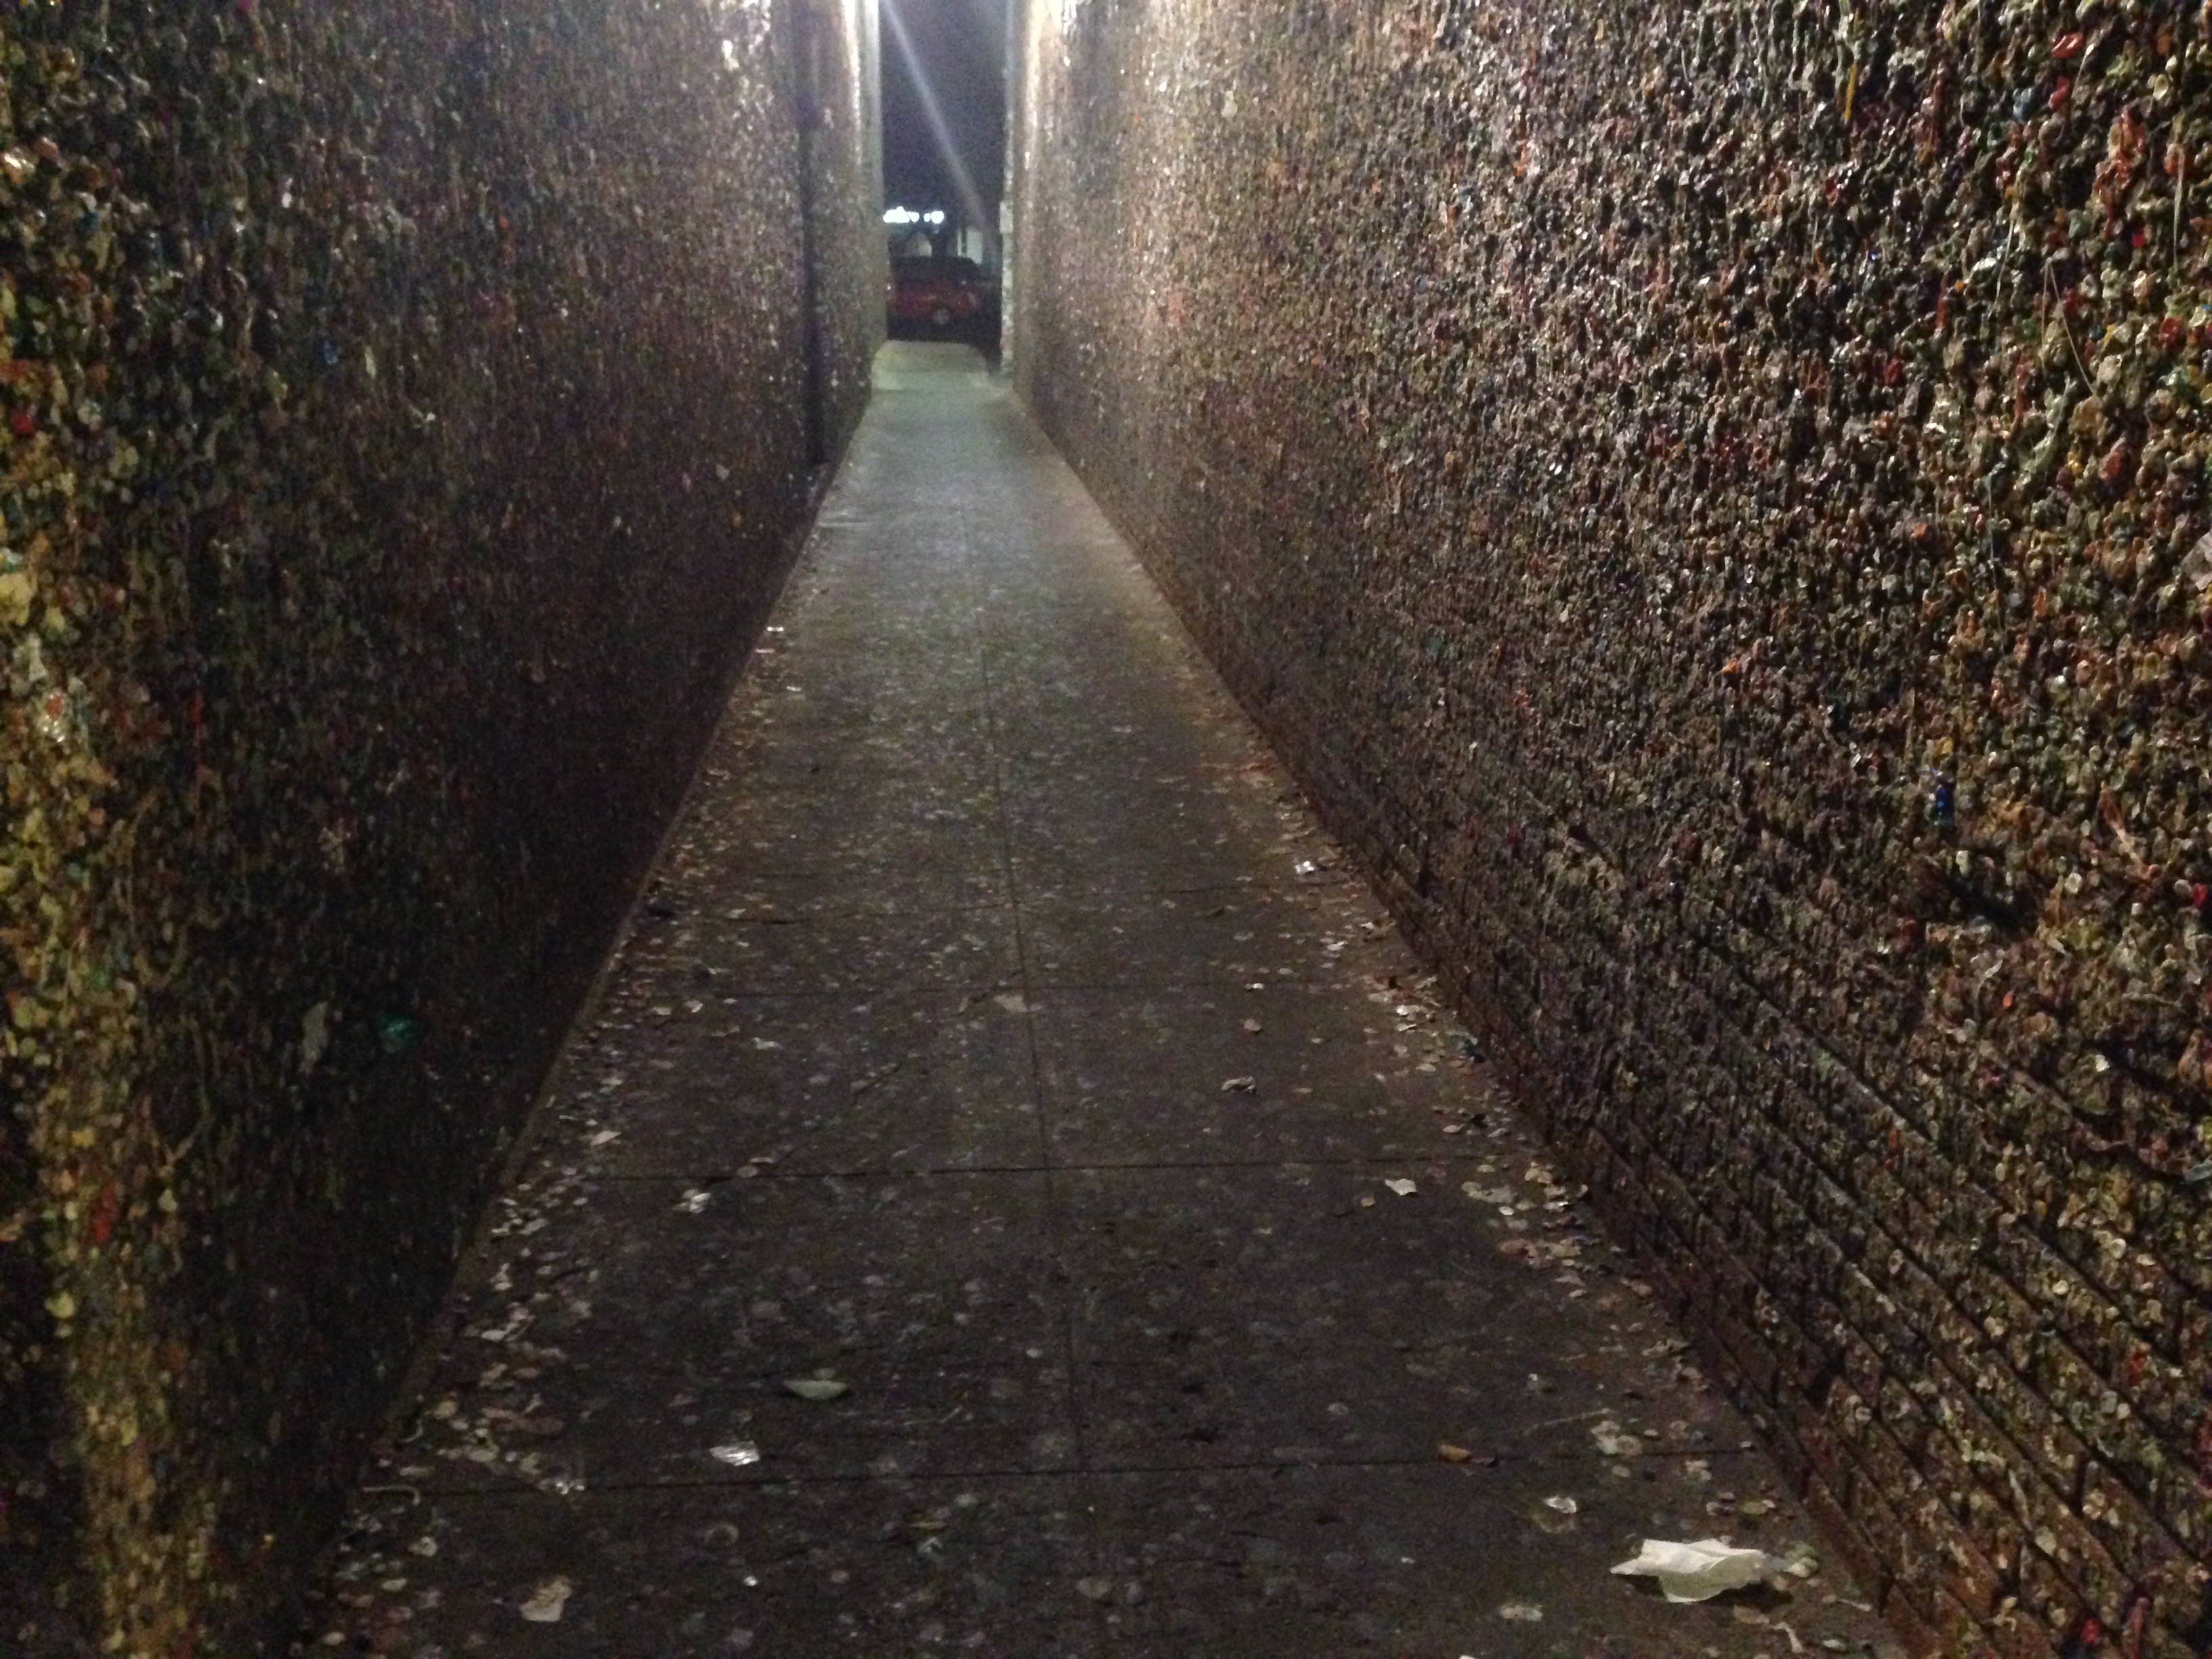 Ebola waiting to happen: in San Luis Obispo, there is an alley where visitors have each stuck their ABC gum. None of us was brave enough to step in, much less plunk any of our product on the wall. Deepak: "It feels like there's a lot of DNA in there."